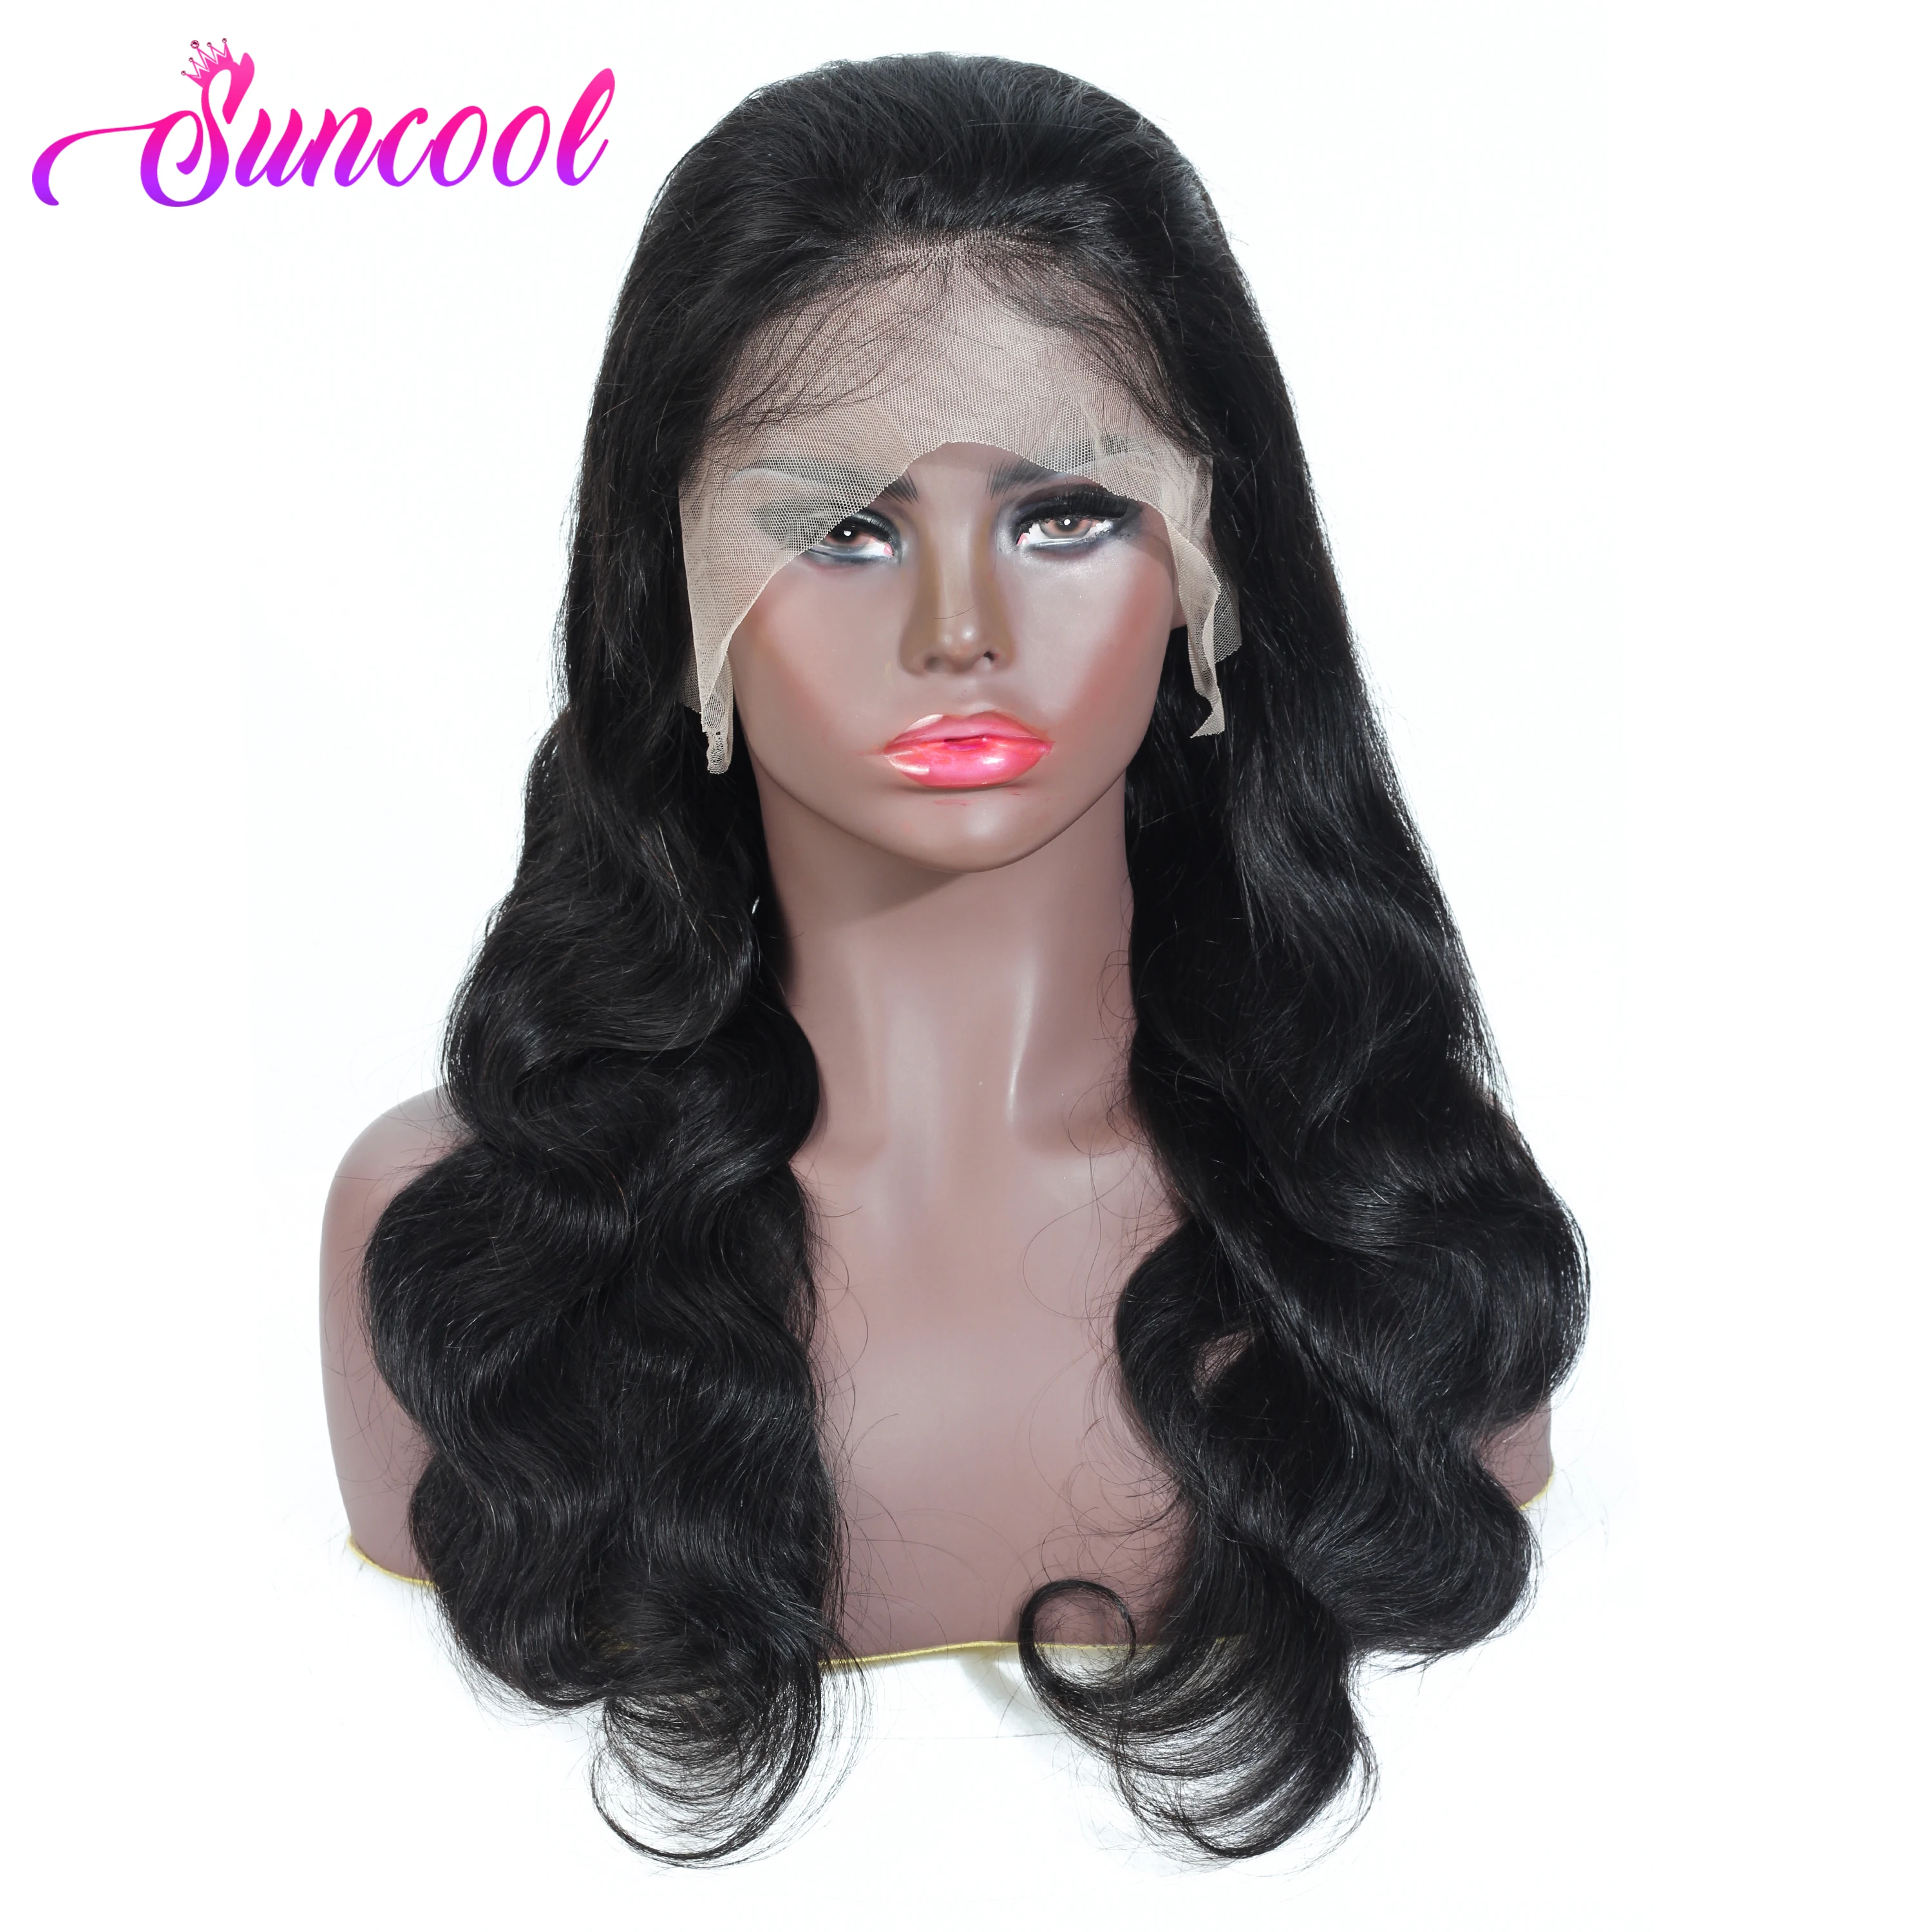 

Brazilian Body Wave Human Hair Wigs 150% Density 13X4 Suncool Hair Body Wave Lace Front Wig Non-remy 4x4 Lace Closure Wig